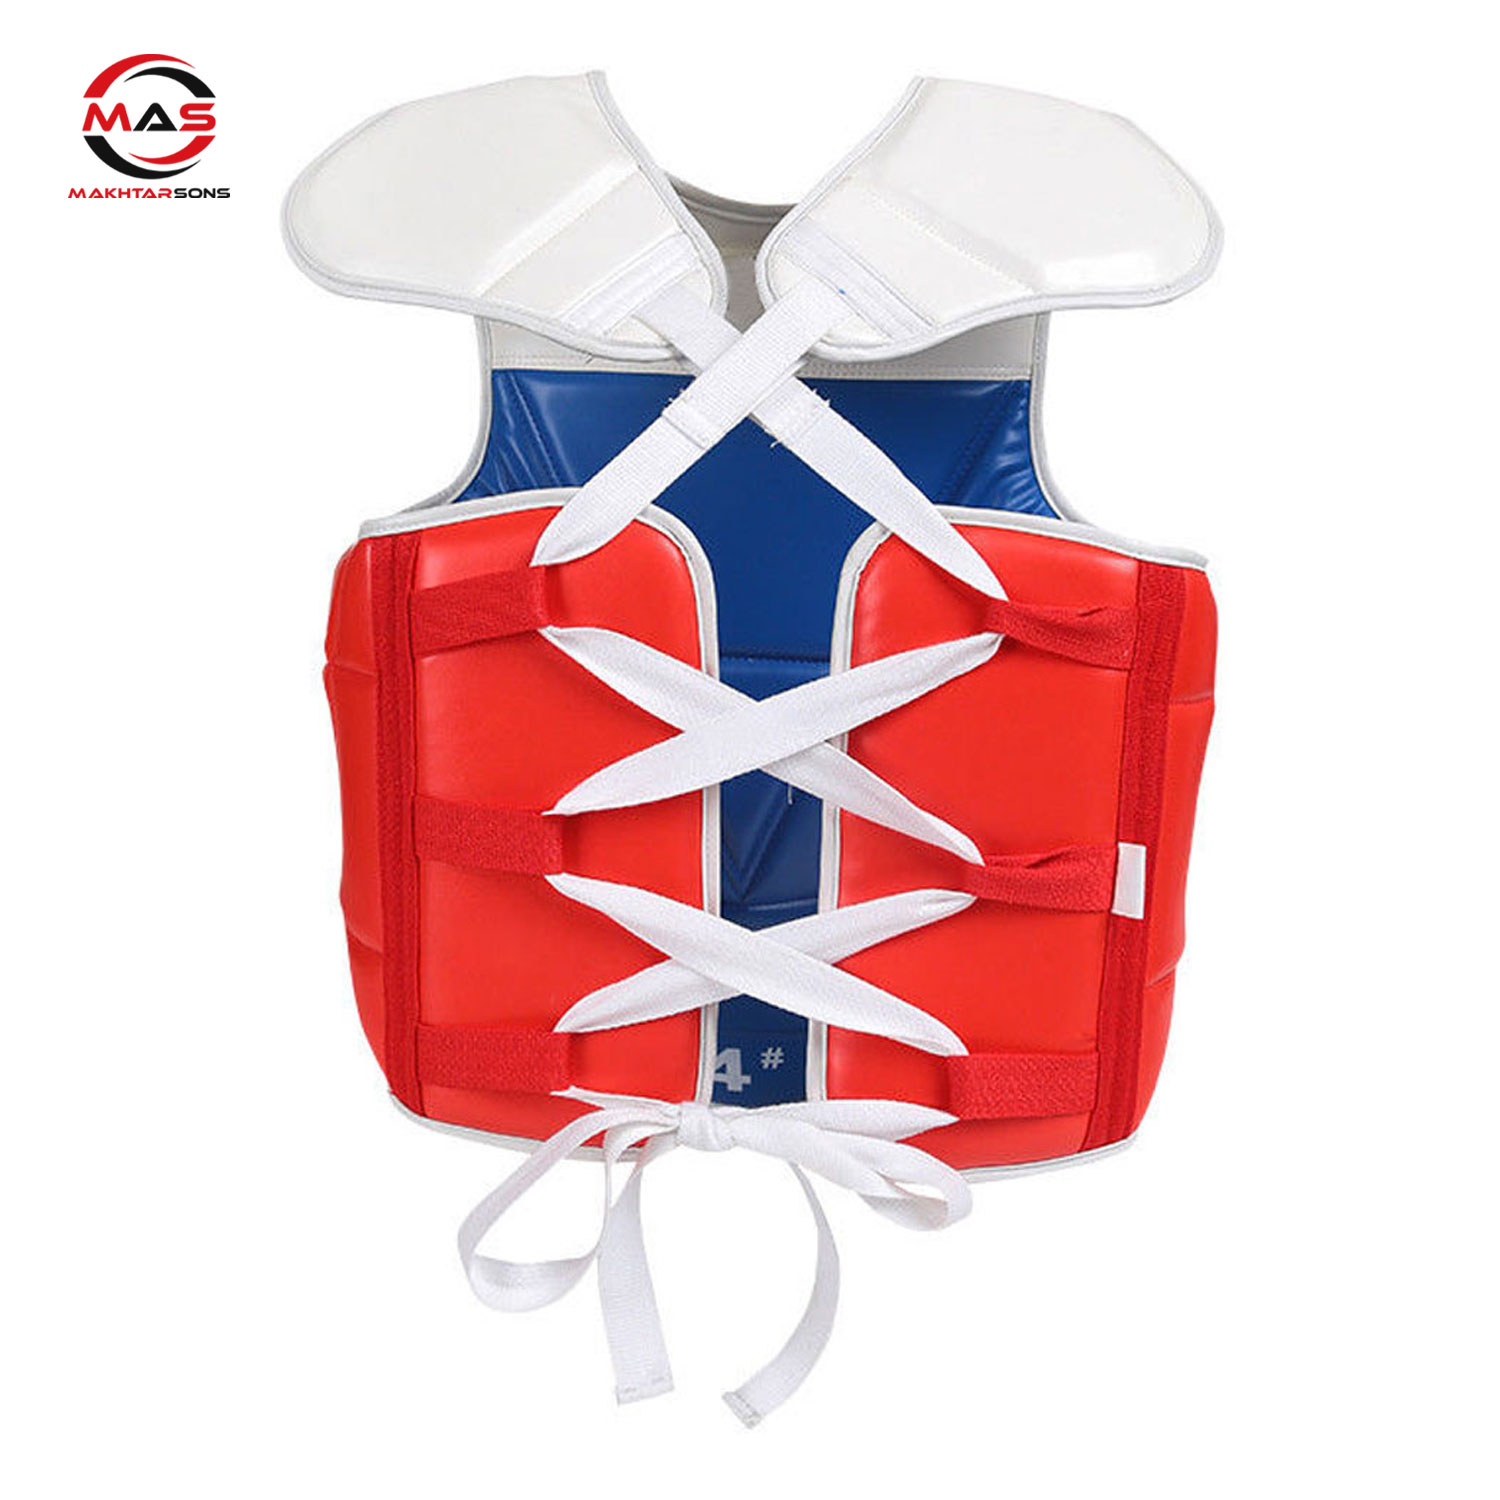 BODY CHEST PROTECTOR | MAS 281